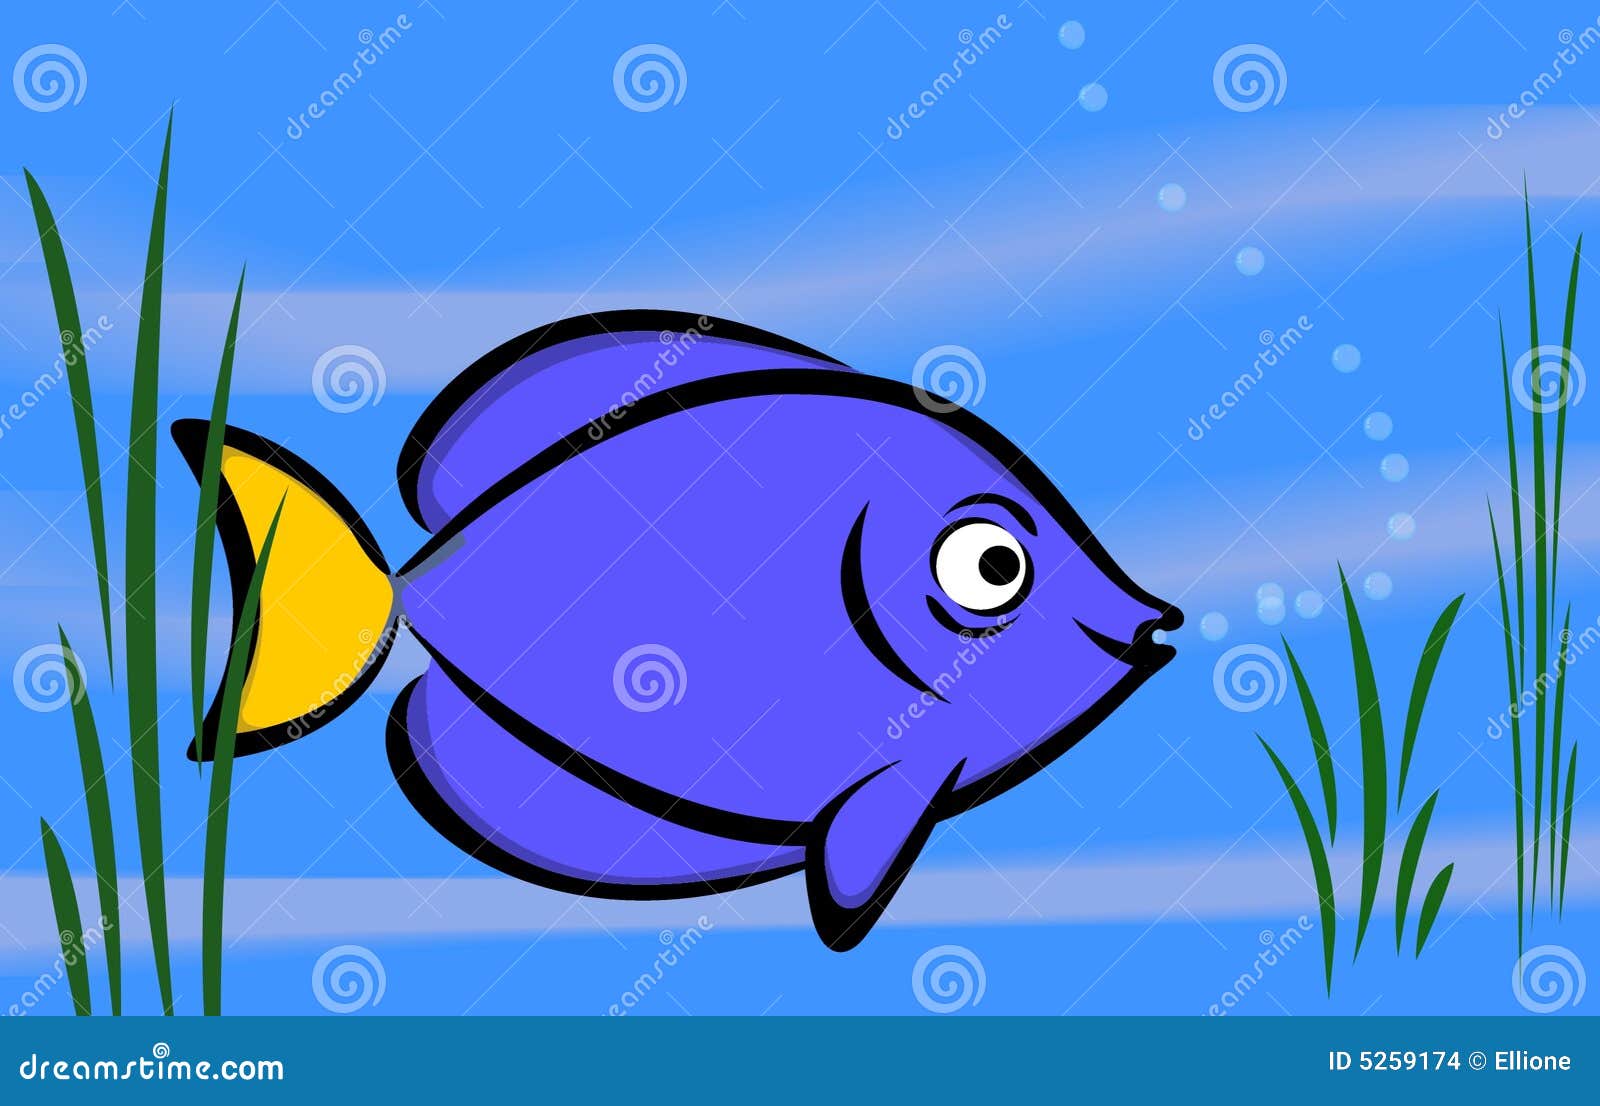 Fish Blue Stock Images - Image: 5259174